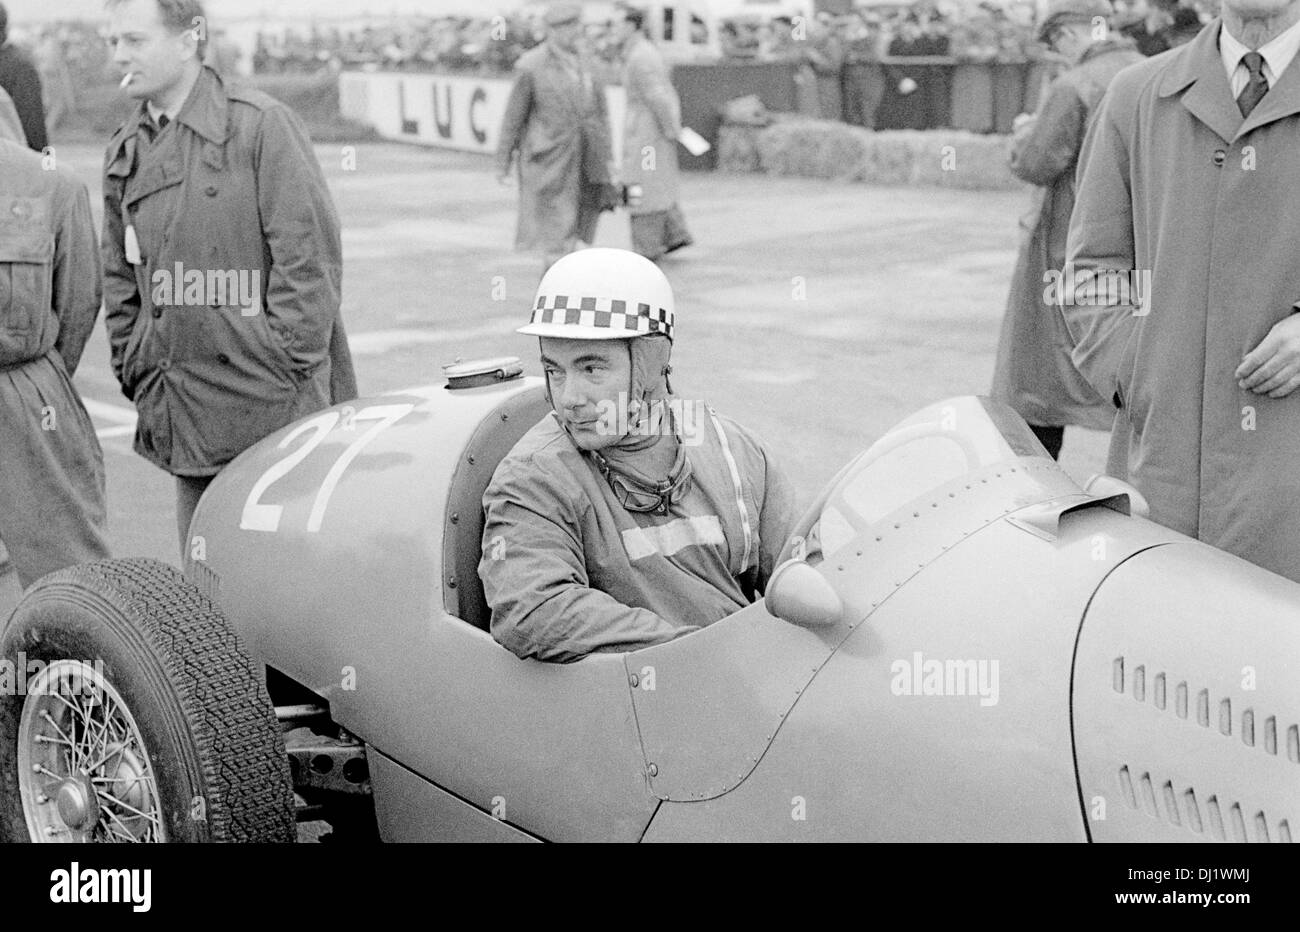 Jean Behra in a Gordini T16, finished 2nd in the VI BRDC International Trophy, Silverstone, England 15 May 1954. Stock Photo